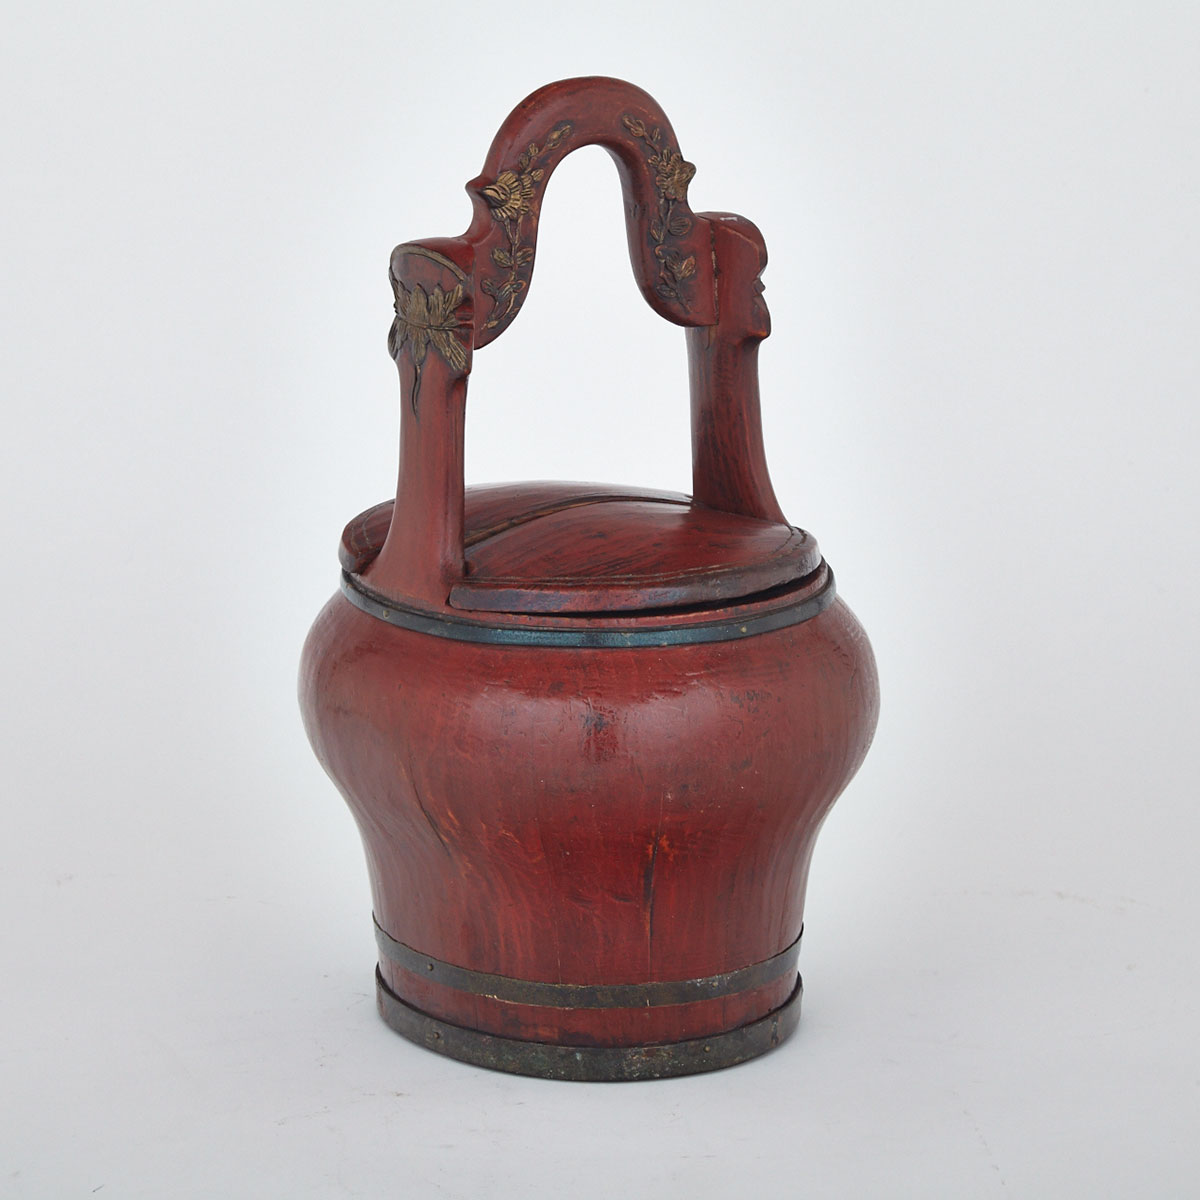 Red Lacquer Basket, Early 20th Century